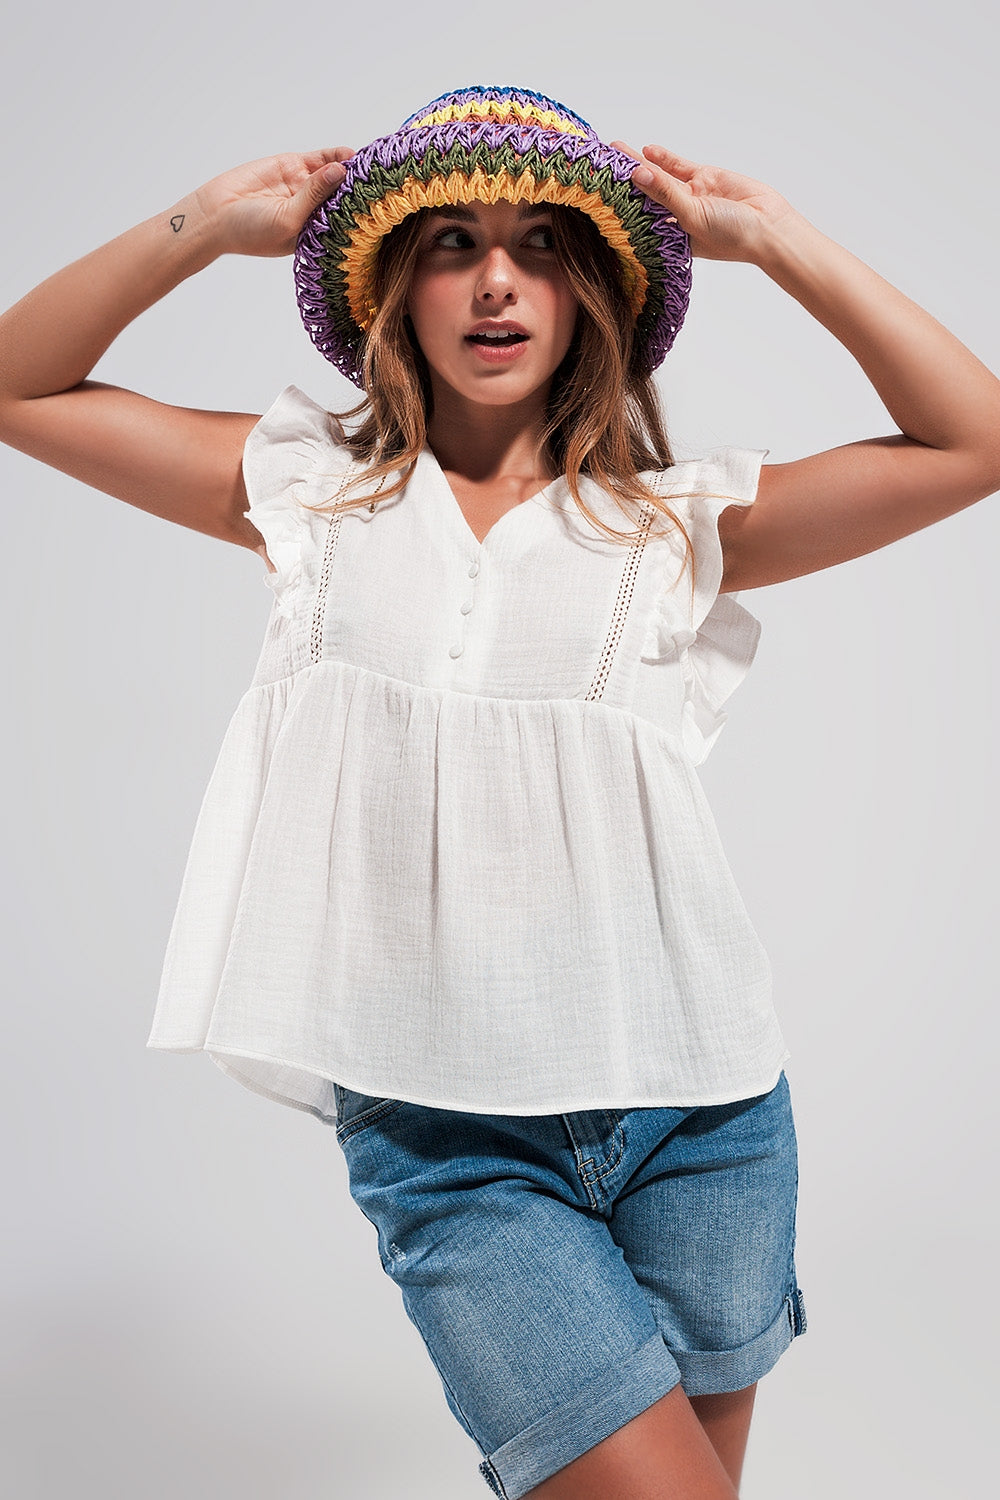 Cotton tank top with ruffle sleeves in white